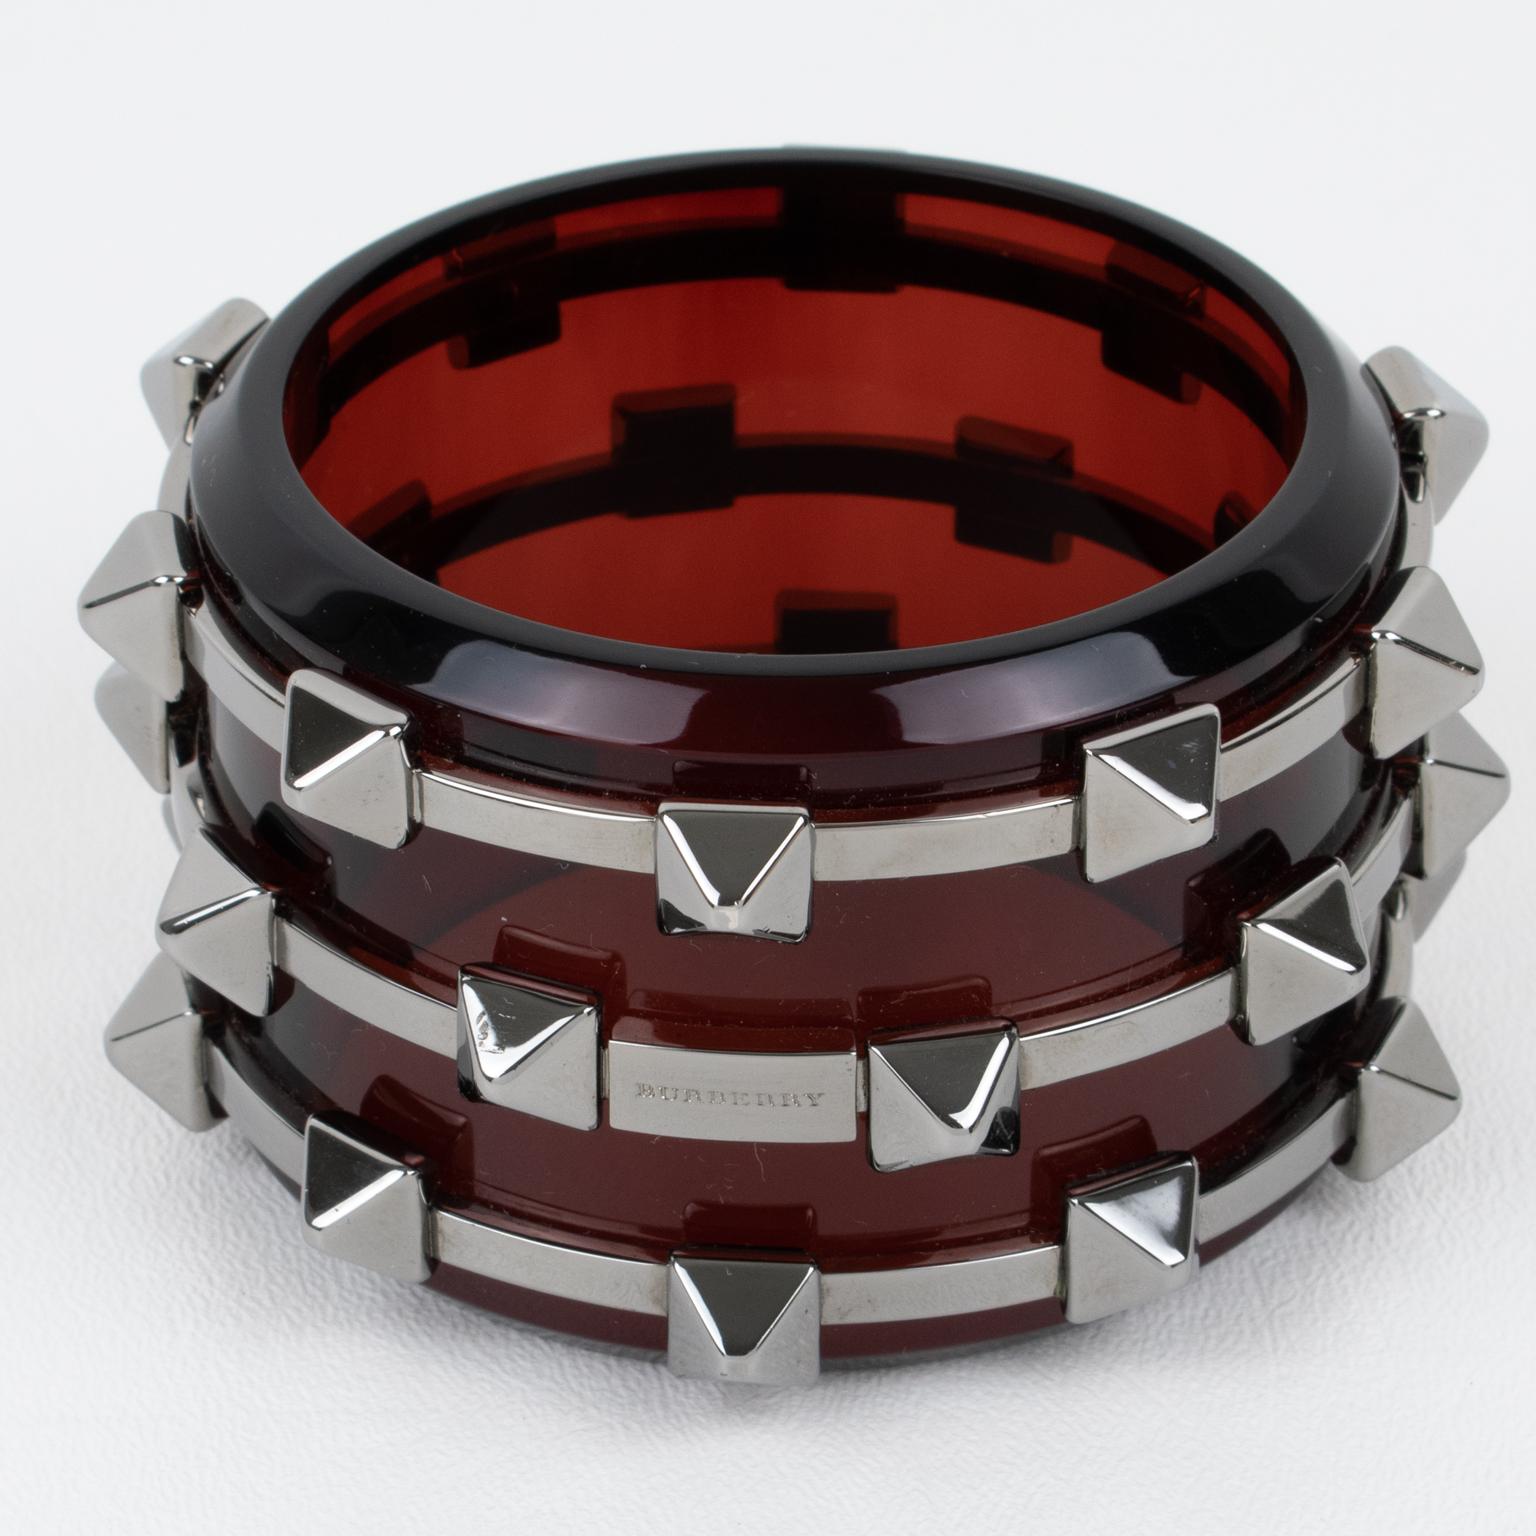 A gorgeous original Burberry massive acrylic and metal bangle bracelet. 
Burberry revisits the punk cuff design in a chic and couture version. Chunky shape with maroon-red Perspex or acrylic bracelet sets with chrome metal rings and spikes. The